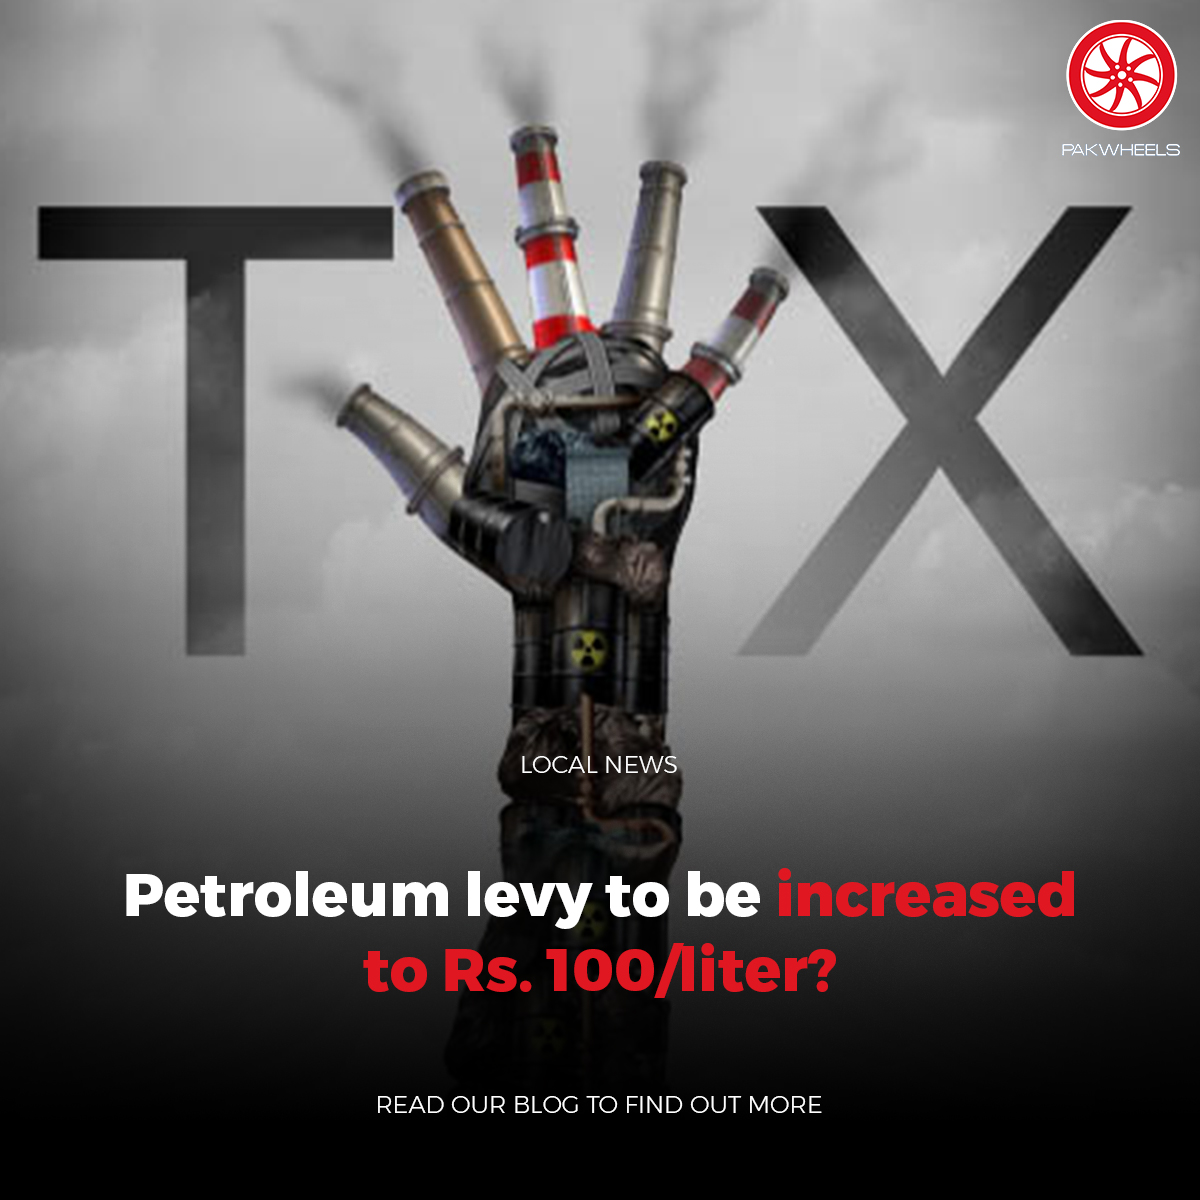 Are the petrol prices in Pakistan going to observe another steep hike in the coming days or weeks? Well, apparently, it seems possible. 

Read the blog: ow.ly/N2Gf50QXo6c

#PakWheels #PWBlogs #Petrol #Levy #Increaase